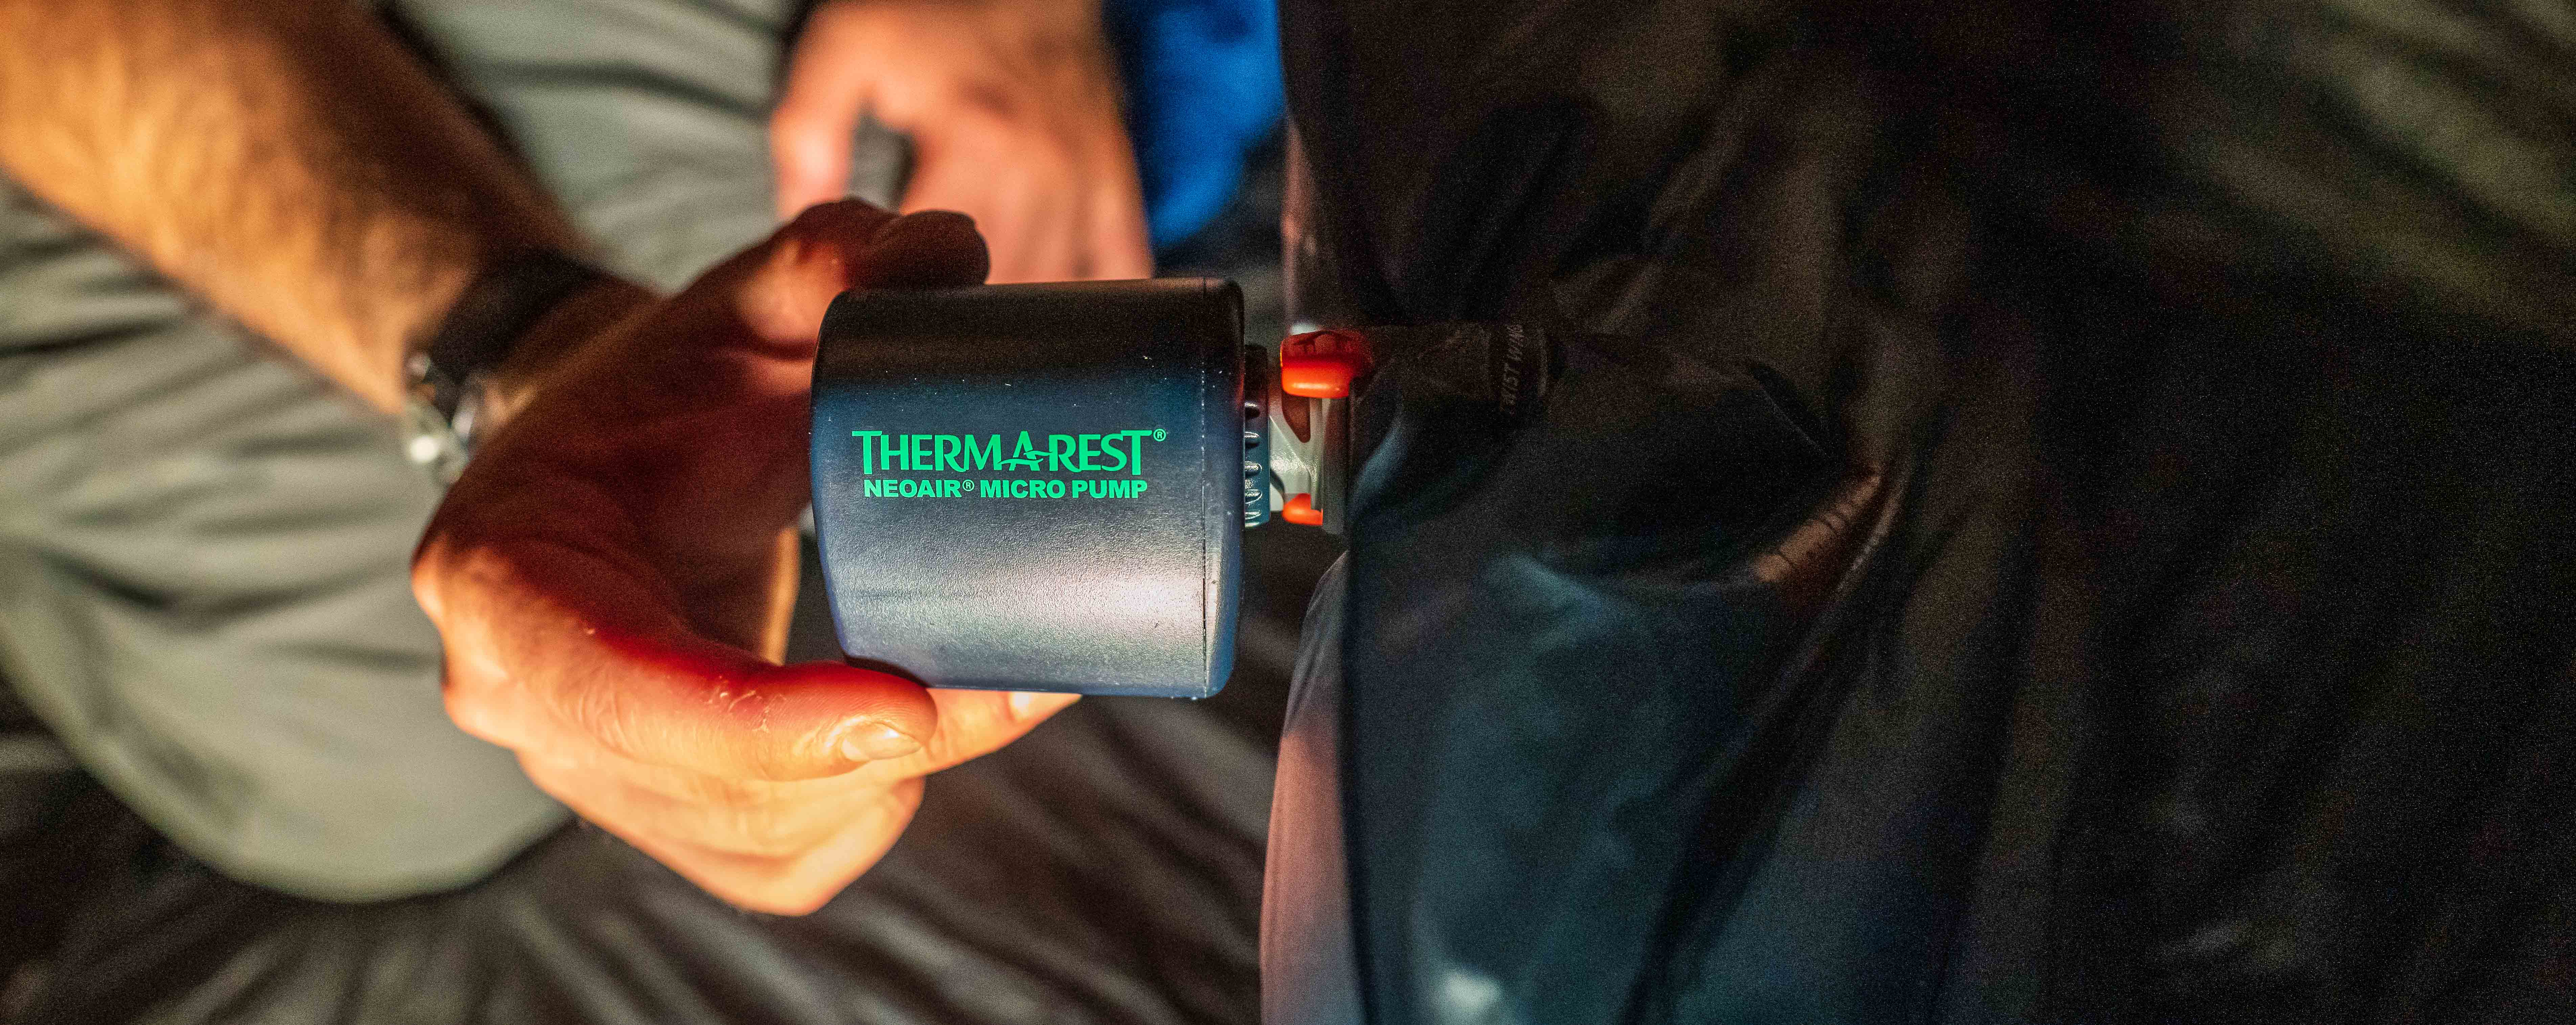 https://www.outdoorprolink.com/product/53186/thermarest-neoair-micropump?categoryid=&sectionid=&manufacturerid=179&entitytype=manufacturer